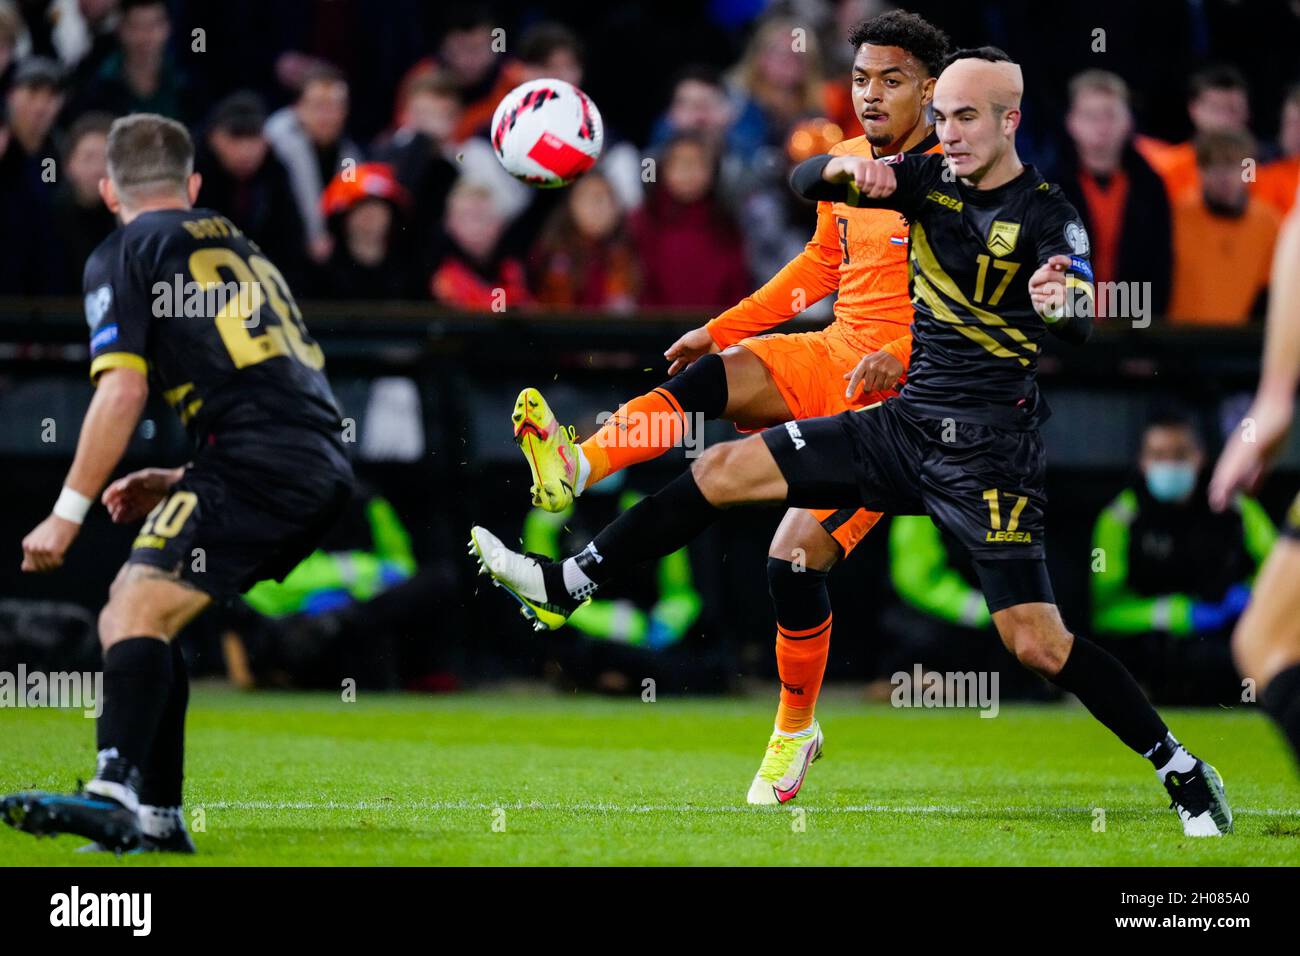 ROTTERDAM, NETHERLANDS - OCTOBER 11: Donyell Malen of the Netherlands and Kian Ronan of Gibraltar during the 2022 FIFA World Cup Qualifier match between Netherlands and Gibraltar at Stadion Feijenoord on October 11, 2021 in Rotterdam, Netherlands (Photo by Geert van Erven/Orange Pictures) Stock Photo